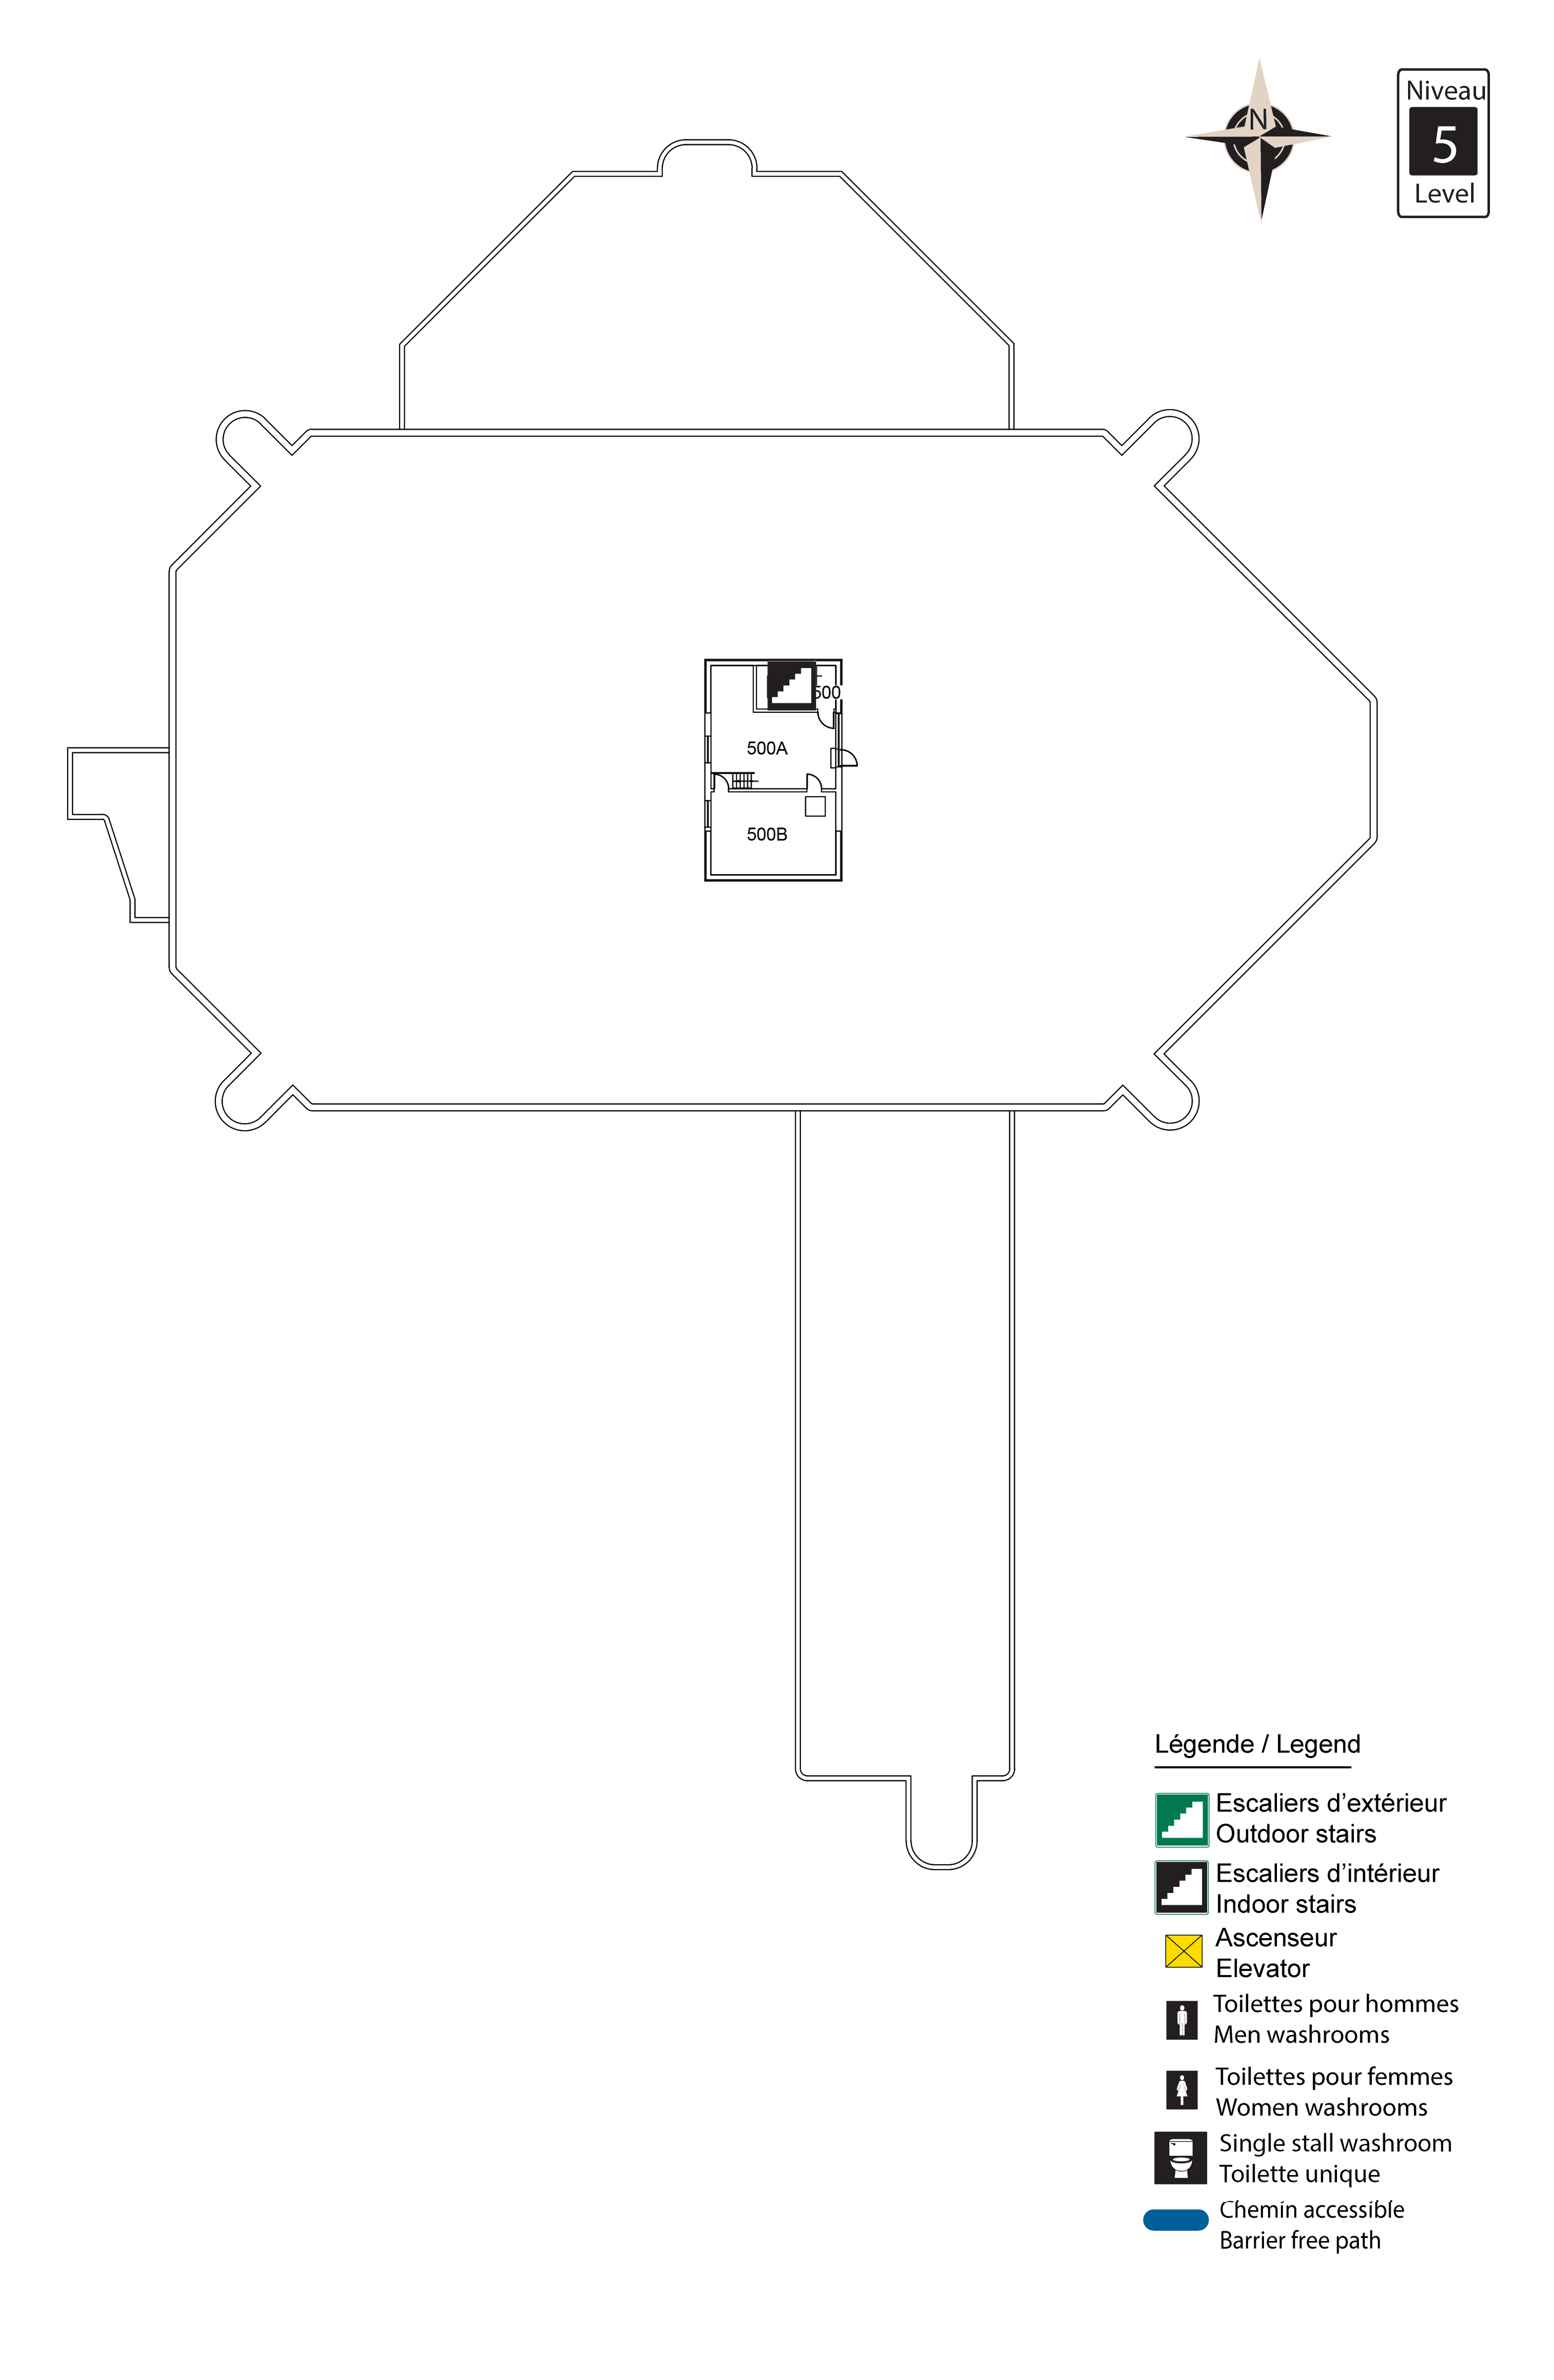 Accessible map of LMX level 5